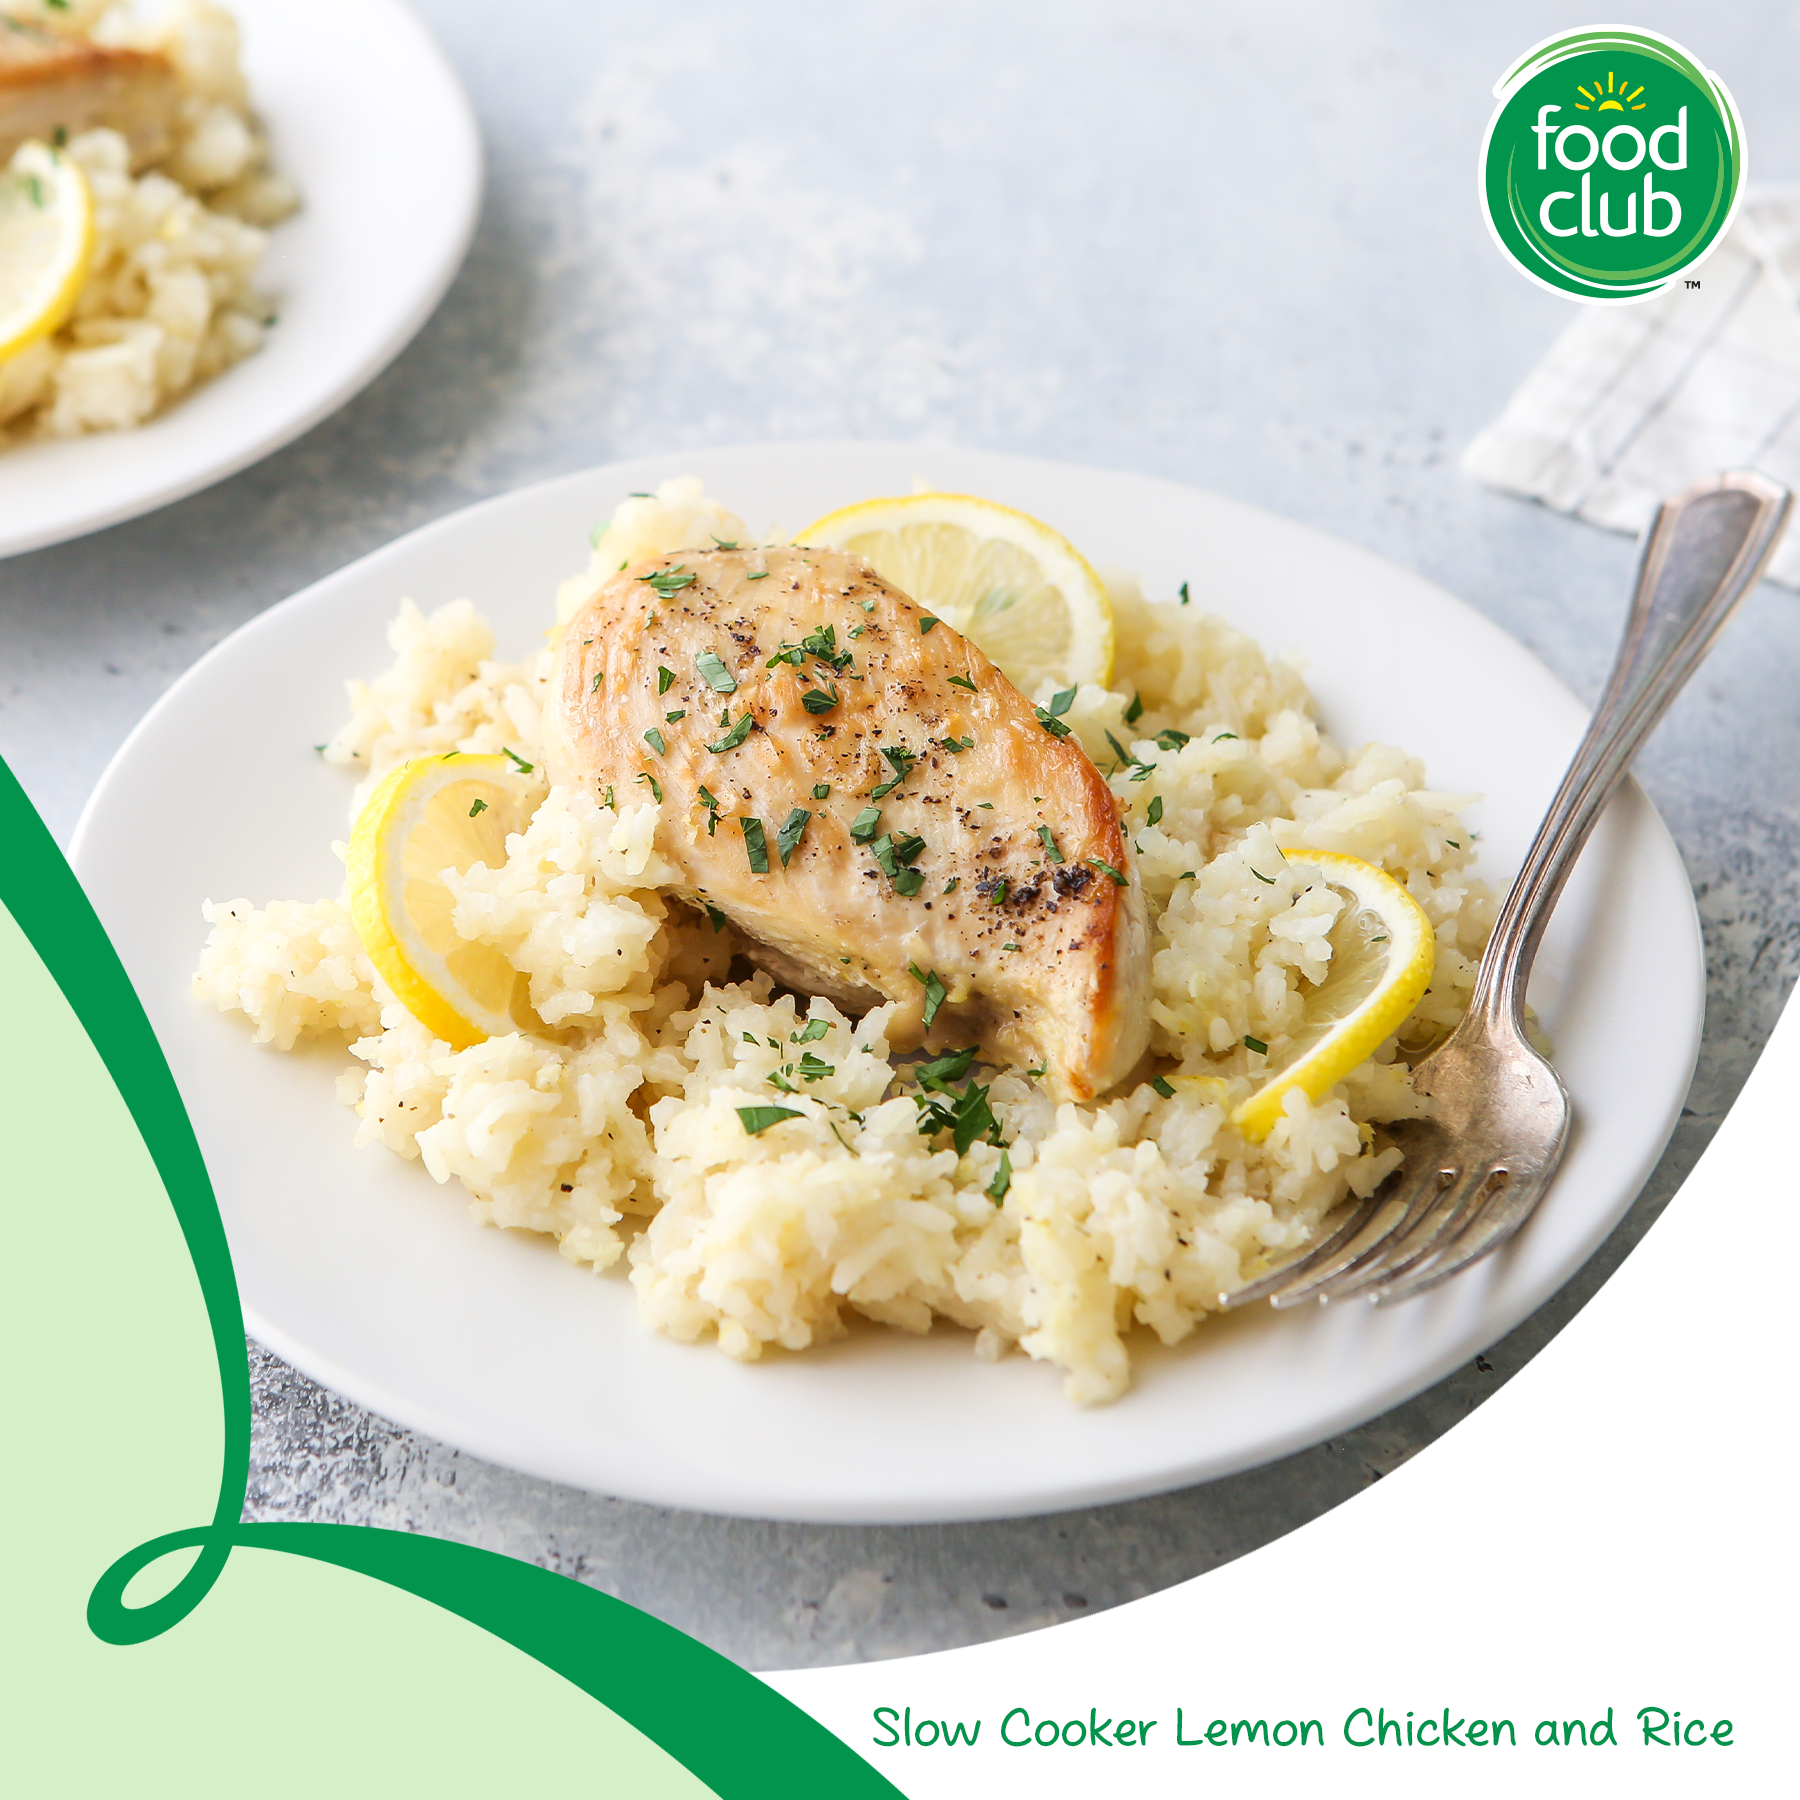 Food Club Slow Cooker Lemon Chicken and Rice